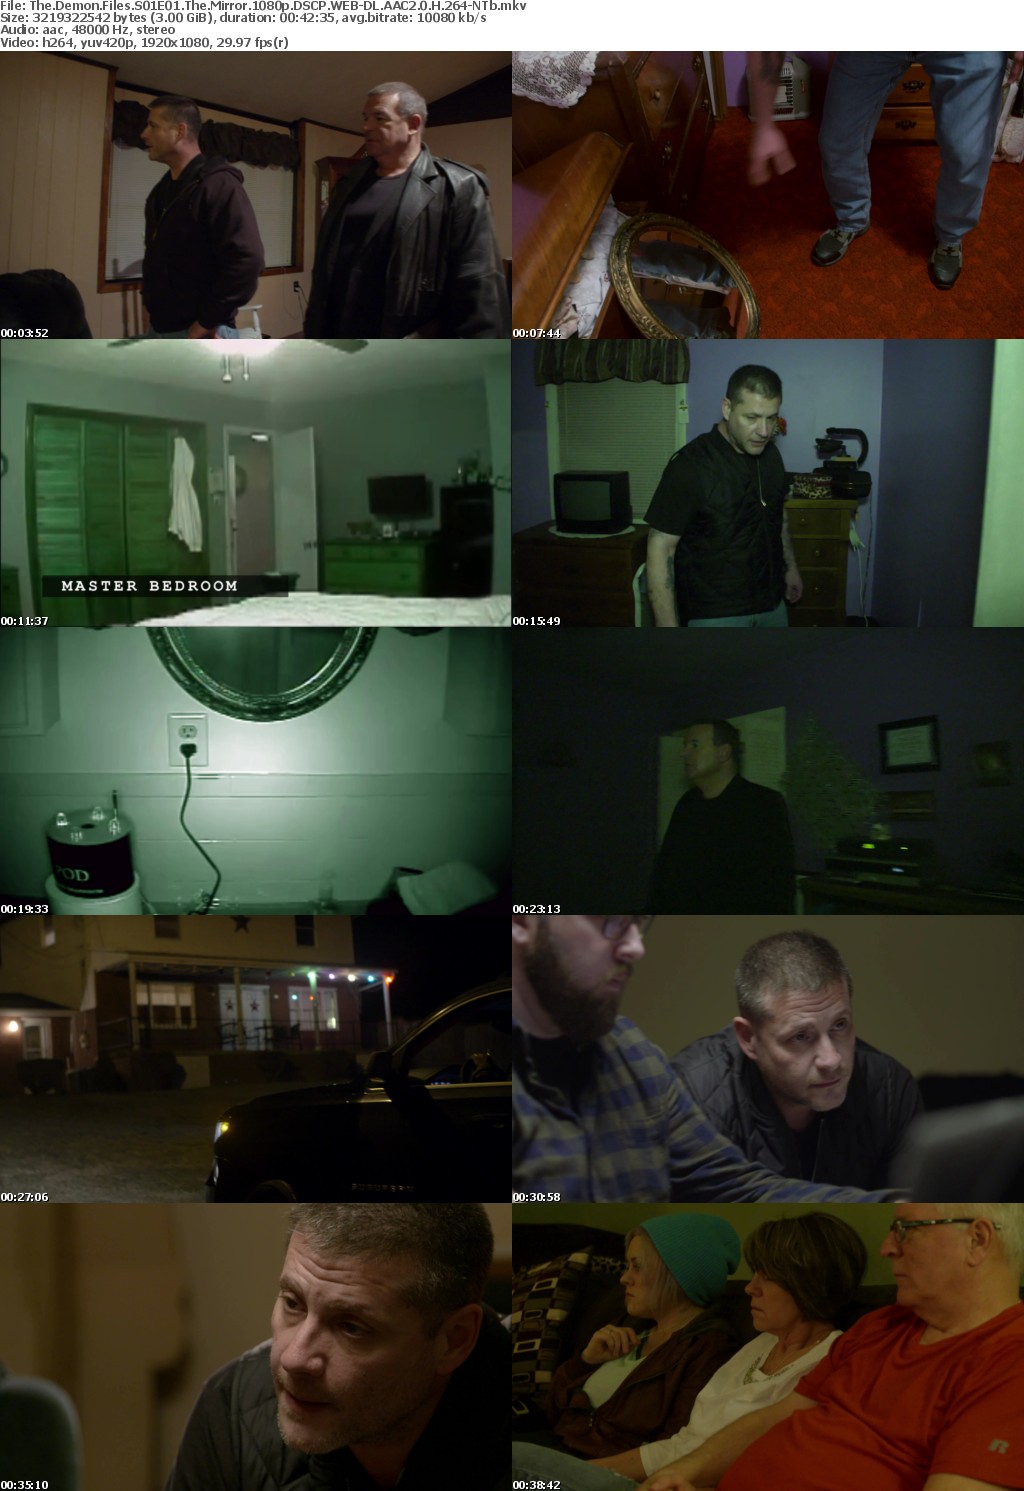 The Demon Files S01E01 The Mirror 1080p DSCP WEB-DL AAC2 0 H 264-NTb